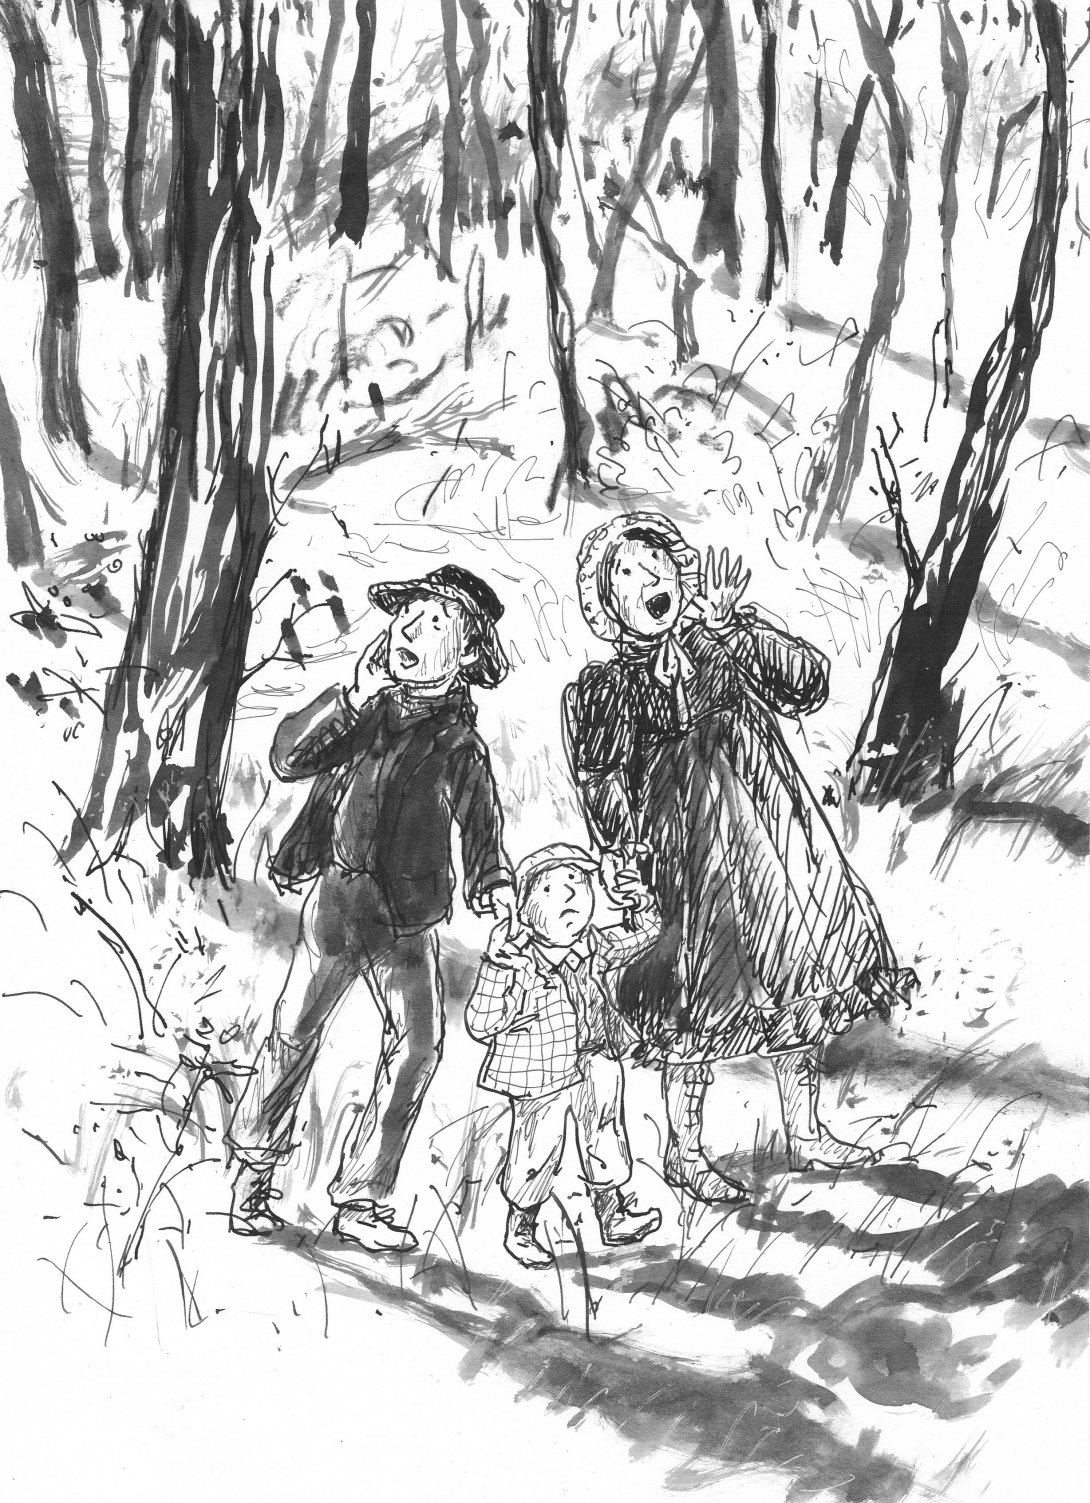 Sketch of a man, woman and child in a forest. The adults each have a hand around their mouths and appear to be yelling